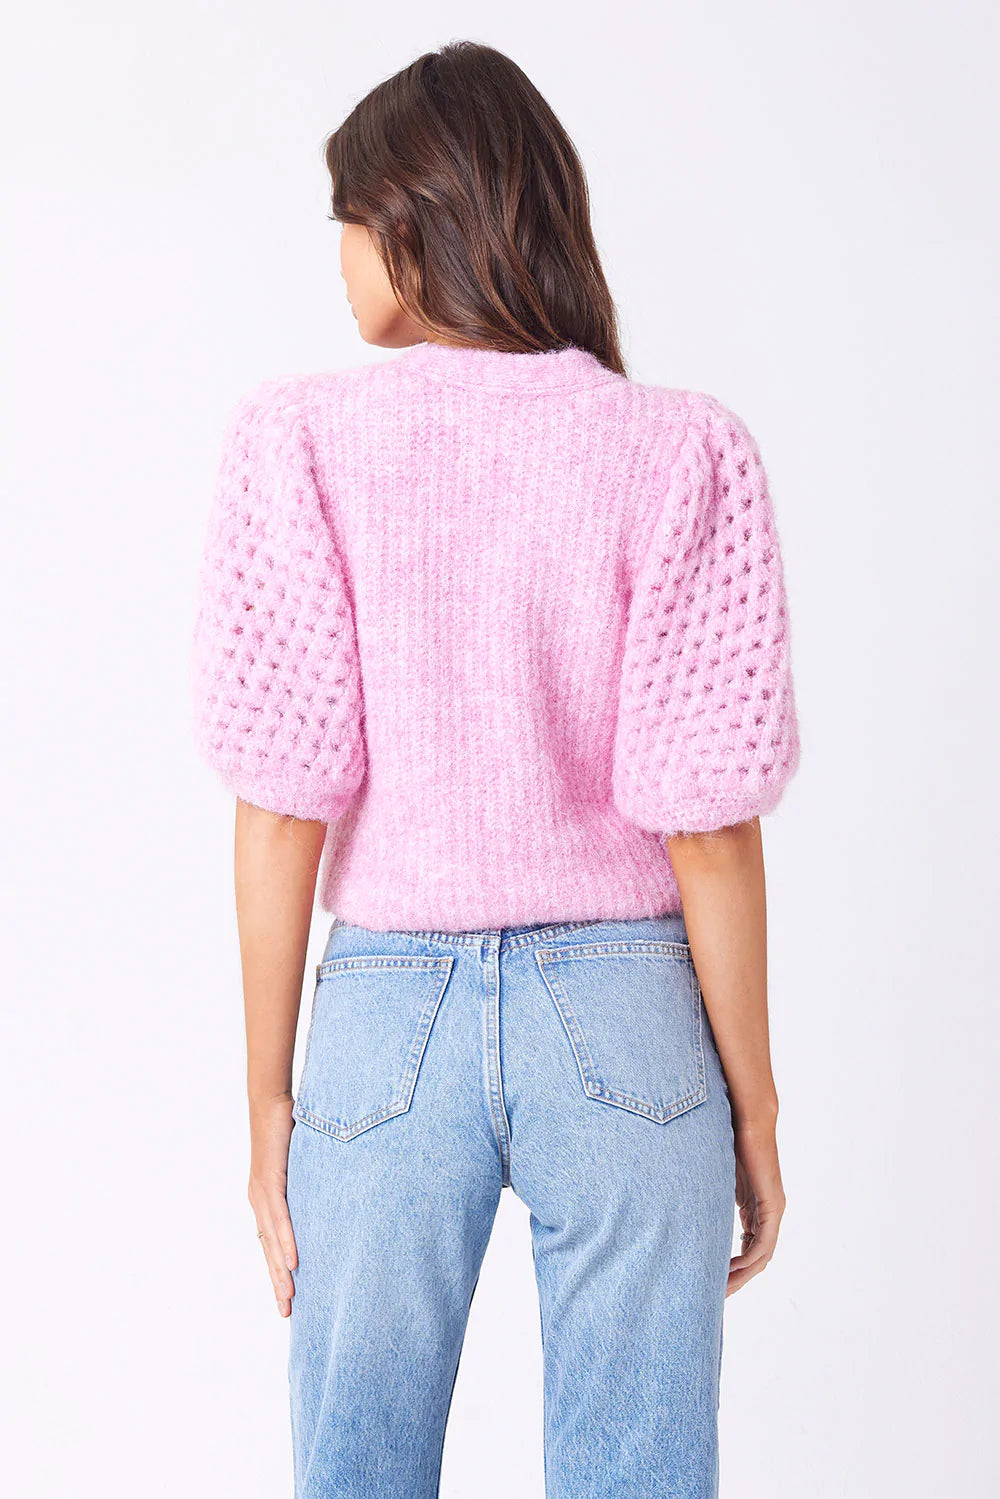 Elyse Sweater-Party Pink